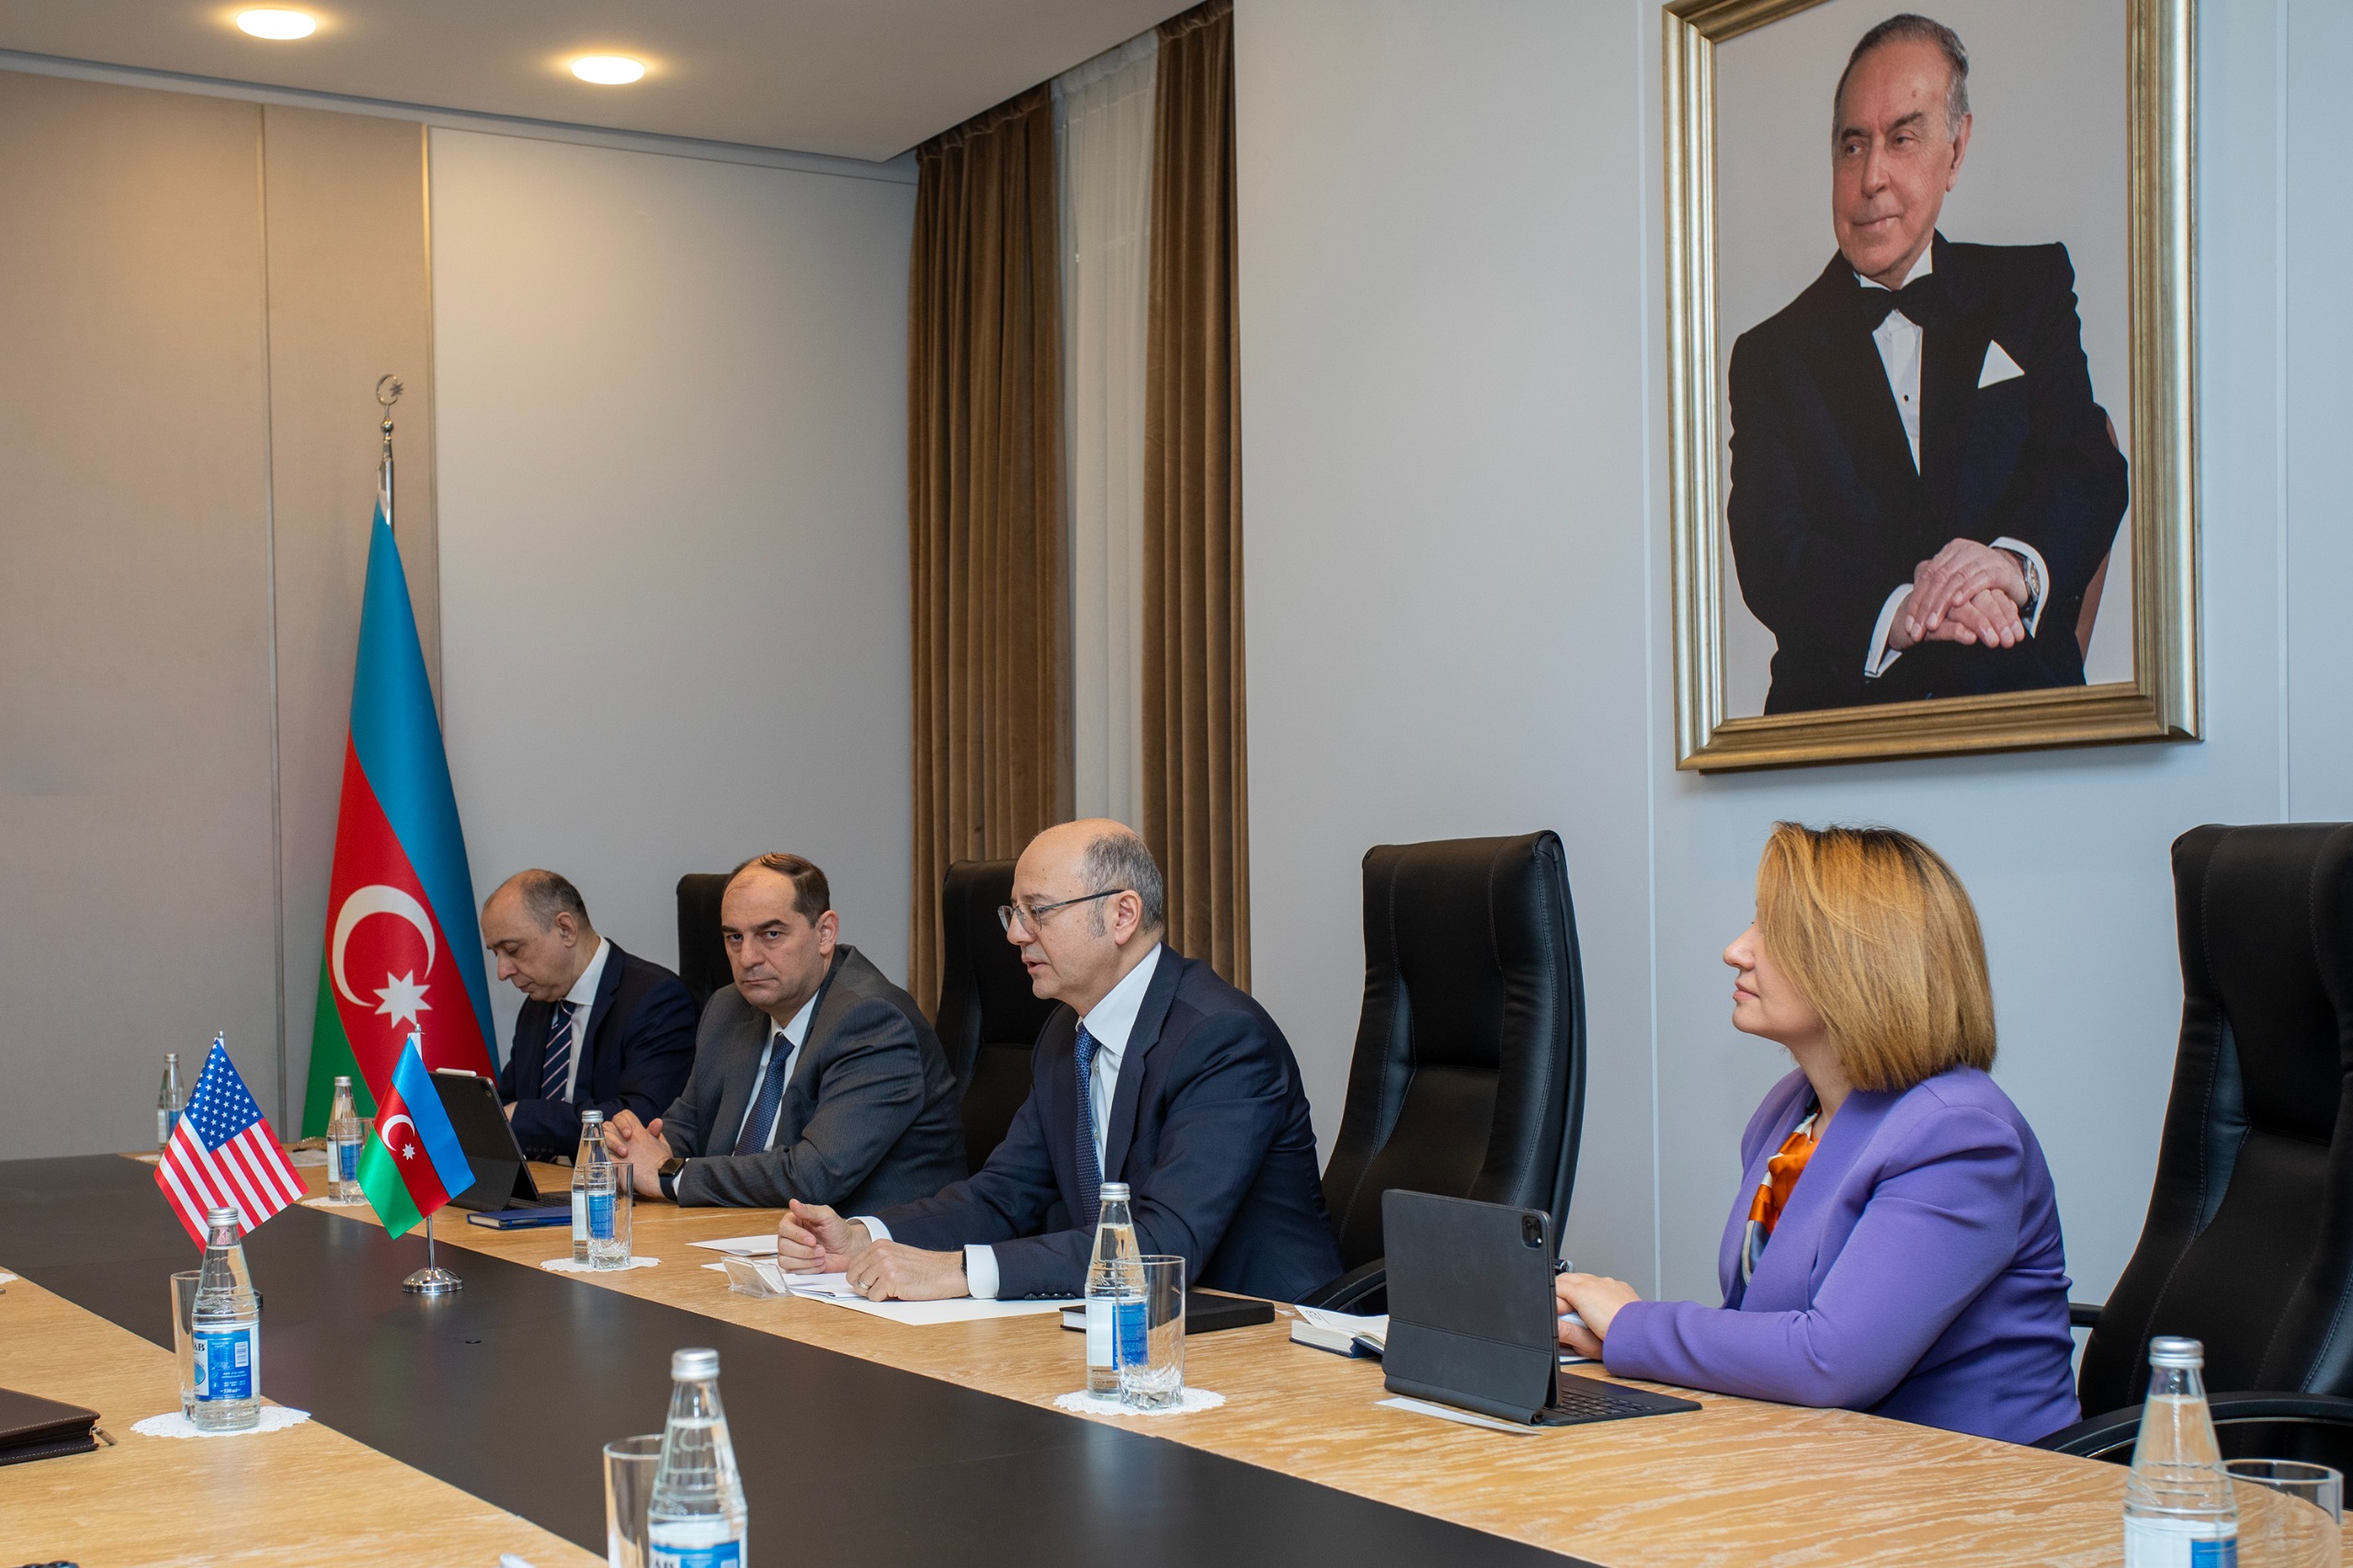 Azerbaijan-US energy partnership was discussed within the Advisory Council